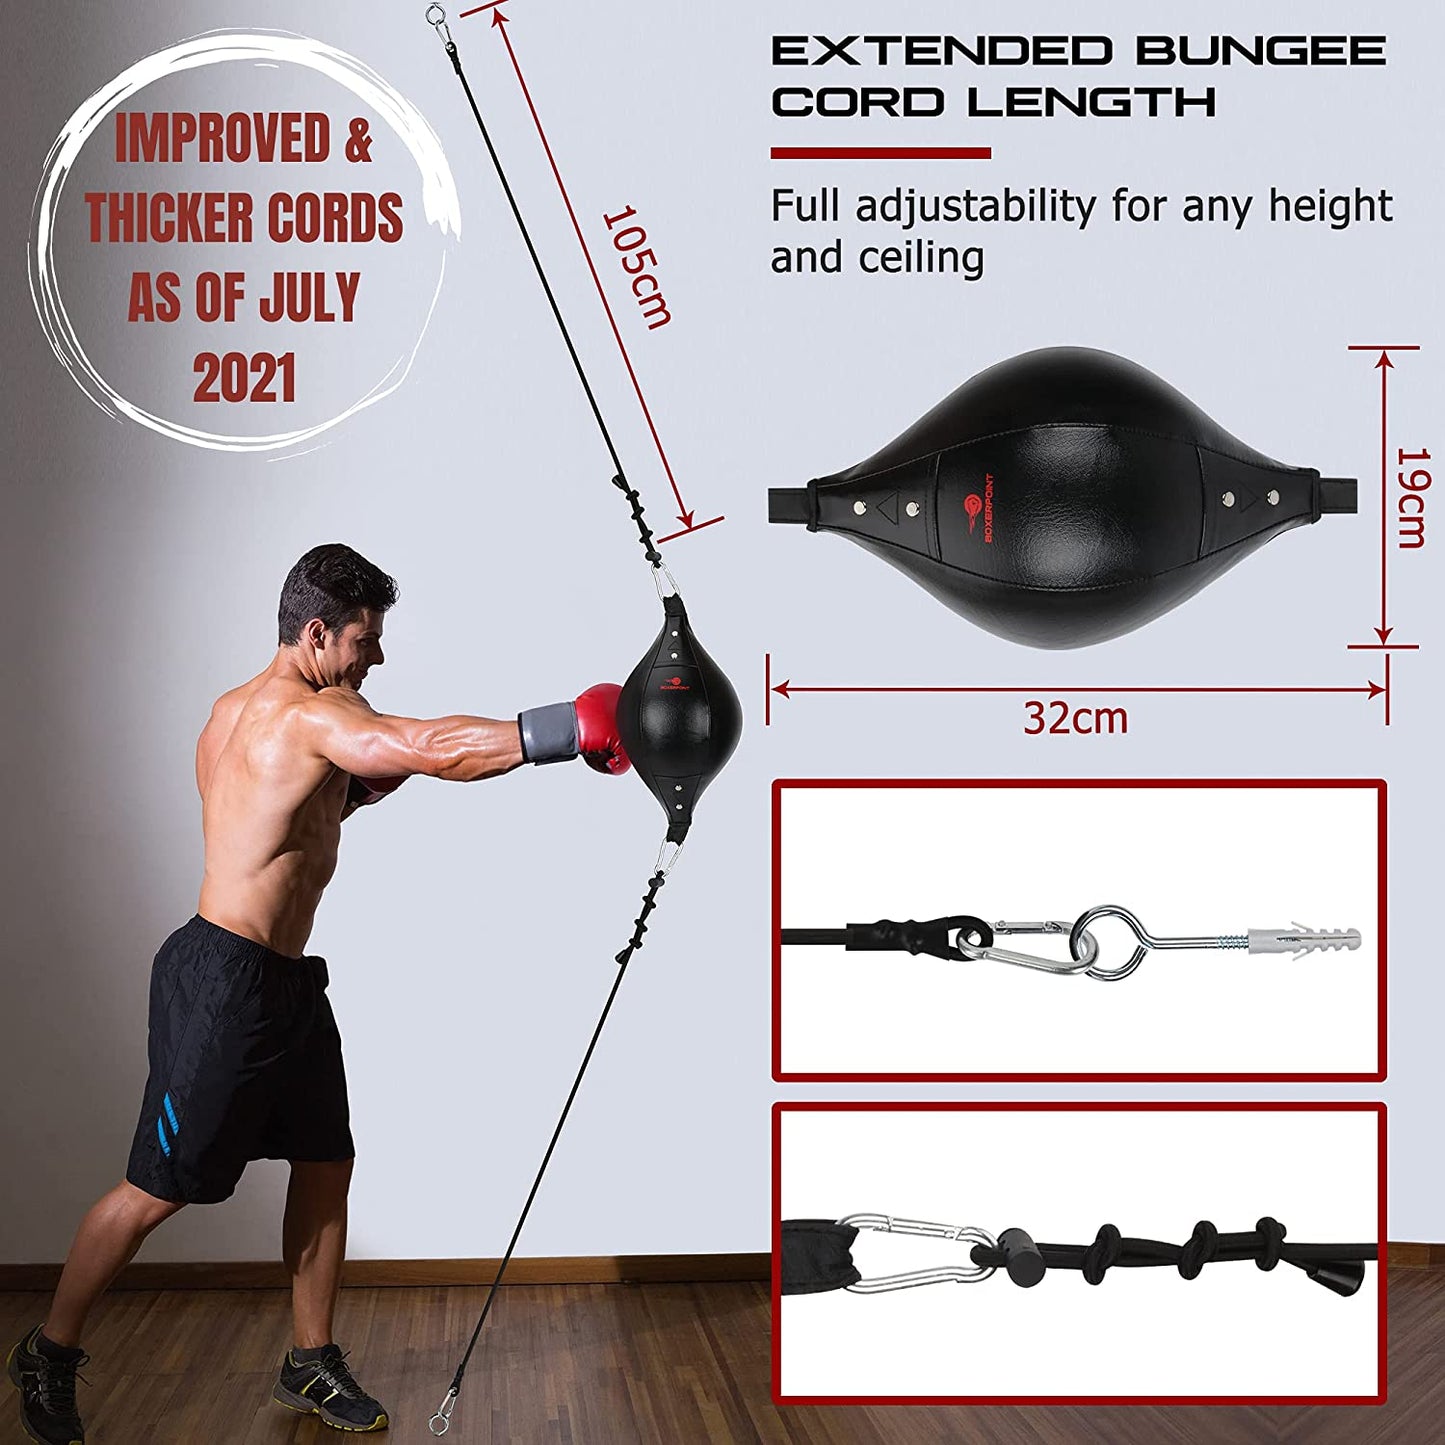 Boxerpoint Double End Punching Bag Kit | PU Leather, 2X41 Adjustable Cords, Hand Wraps, Carry Bag and Installation | Double End Bag Boxing Equipment for Home and Gym - Double End Boxing Bag Kit